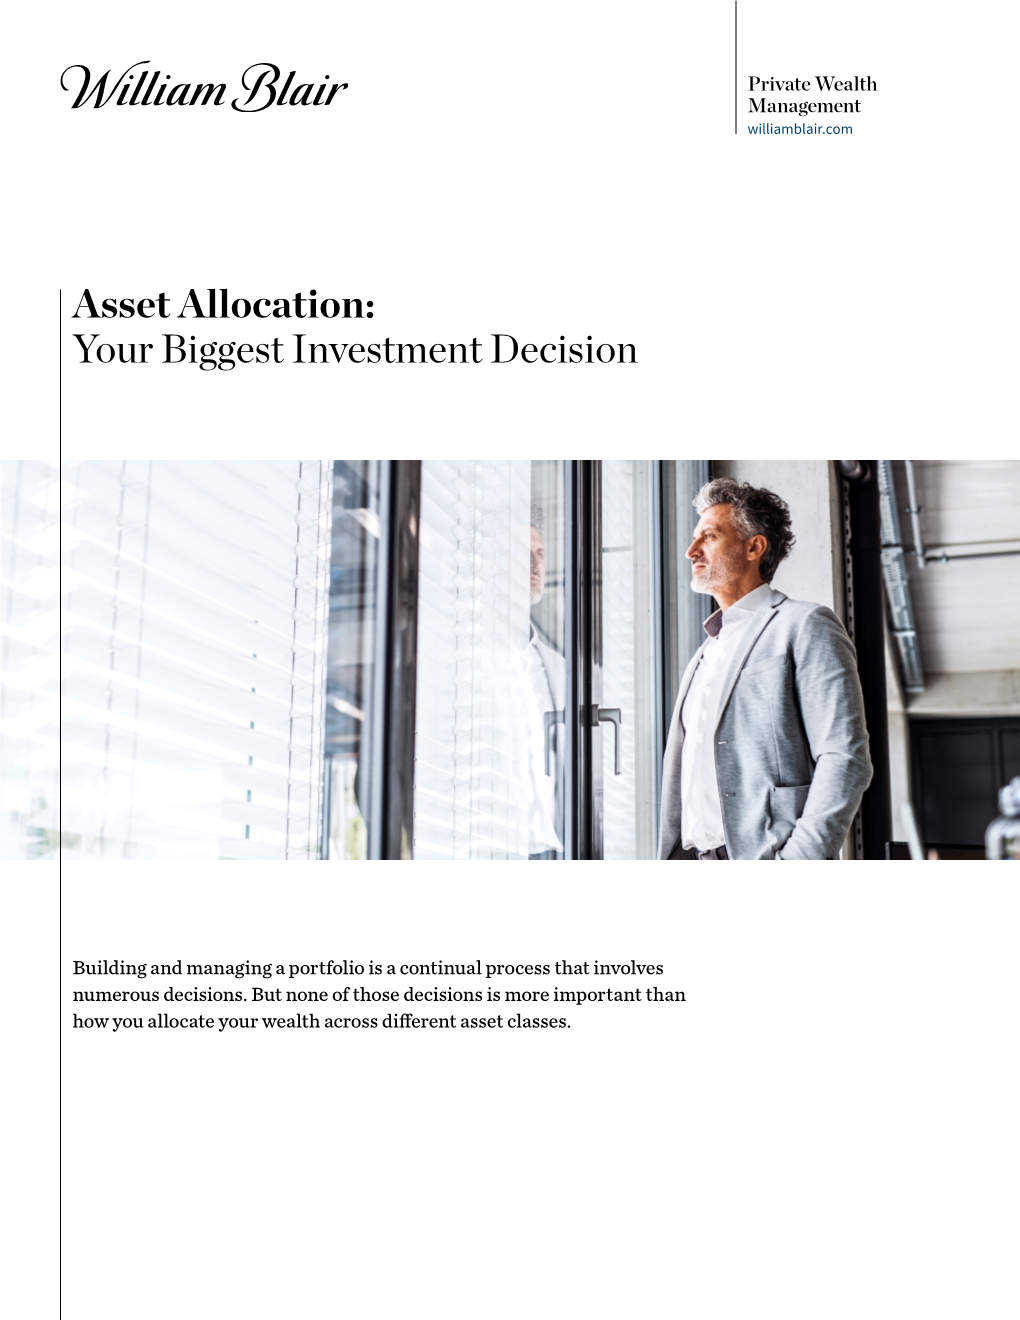 Asset Allocation: Your Biggest Investment Decision